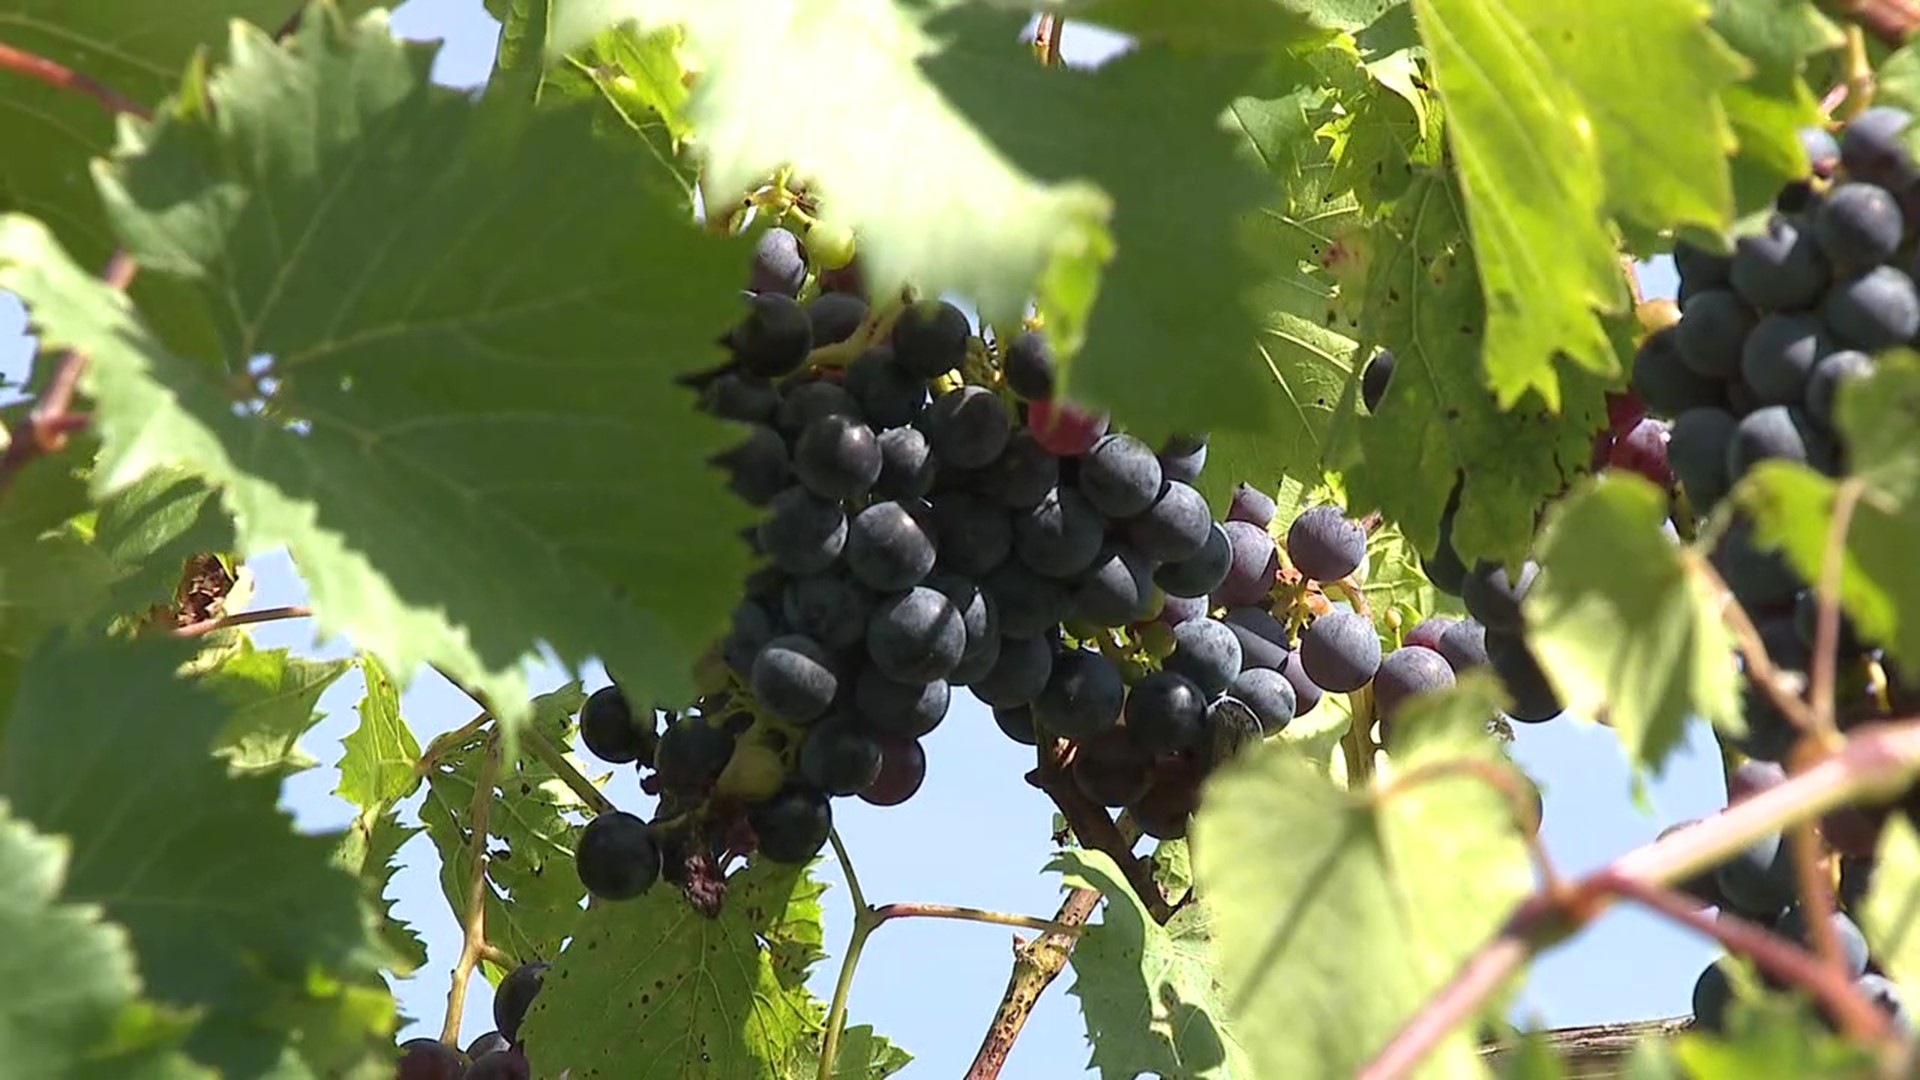 Newswatch 16's Nikki Krize stopped by a winery in Northumberland County to find out how the grapes fare with the lack of rainfall.